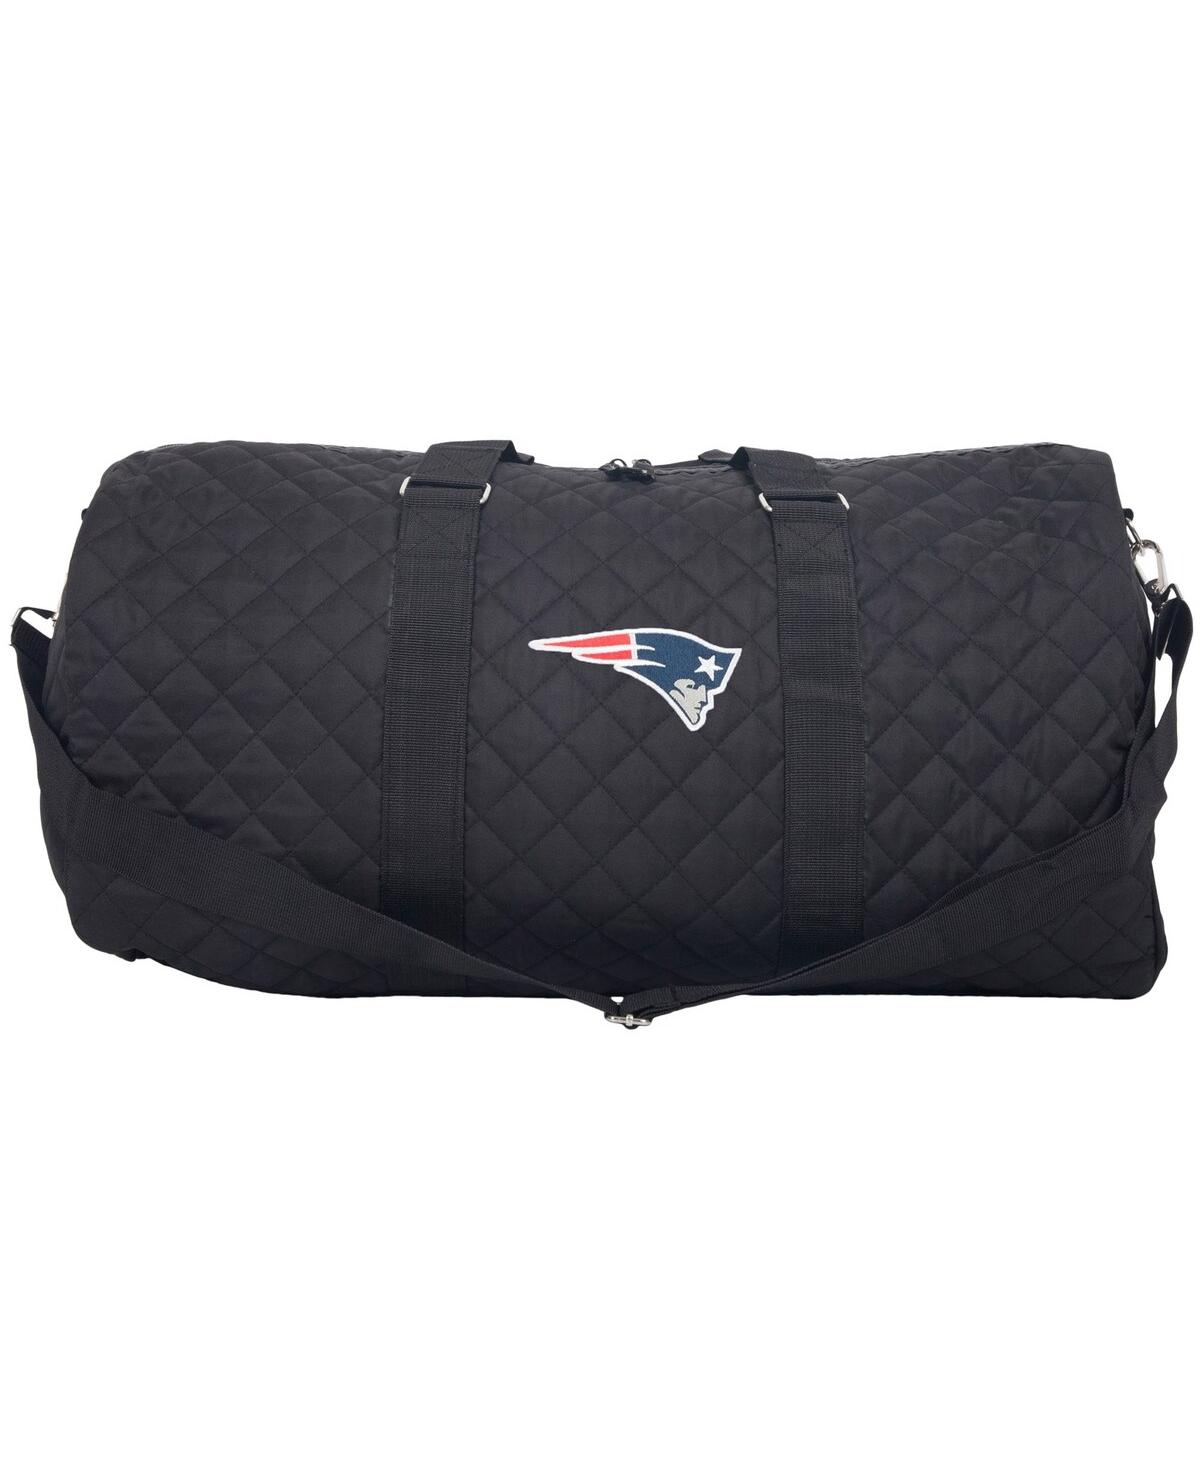 Women's New England Patriots Quilted Layover Duffle Bag - Black